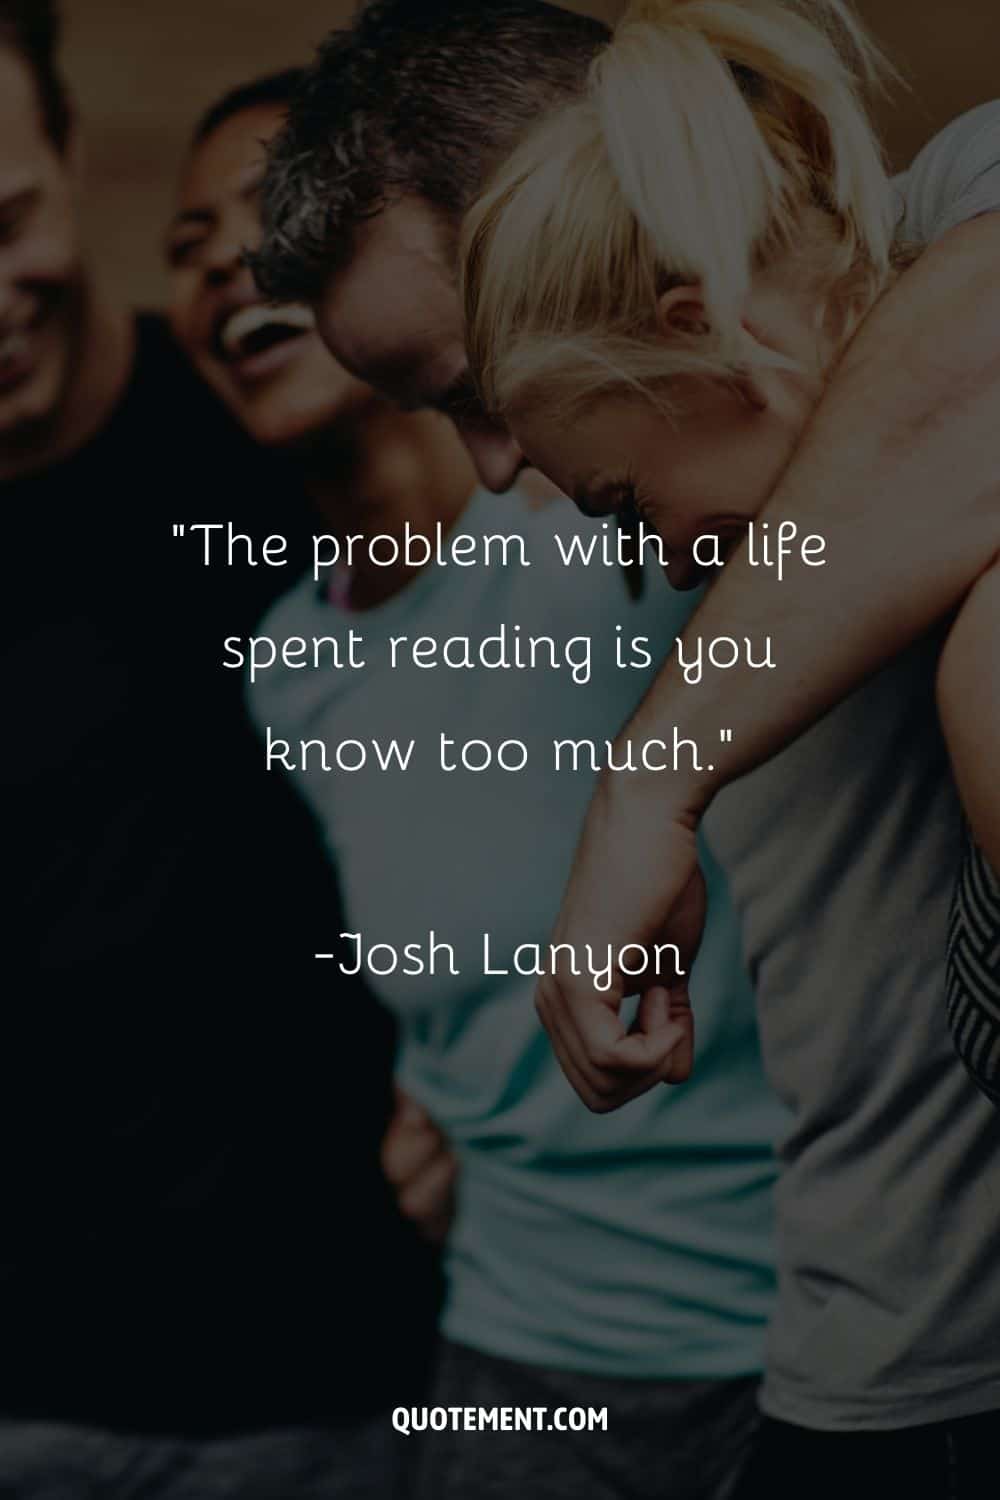 “The problem with a life spent reading is you know too much.” ― Josh Lanyon, The Dickens with Love